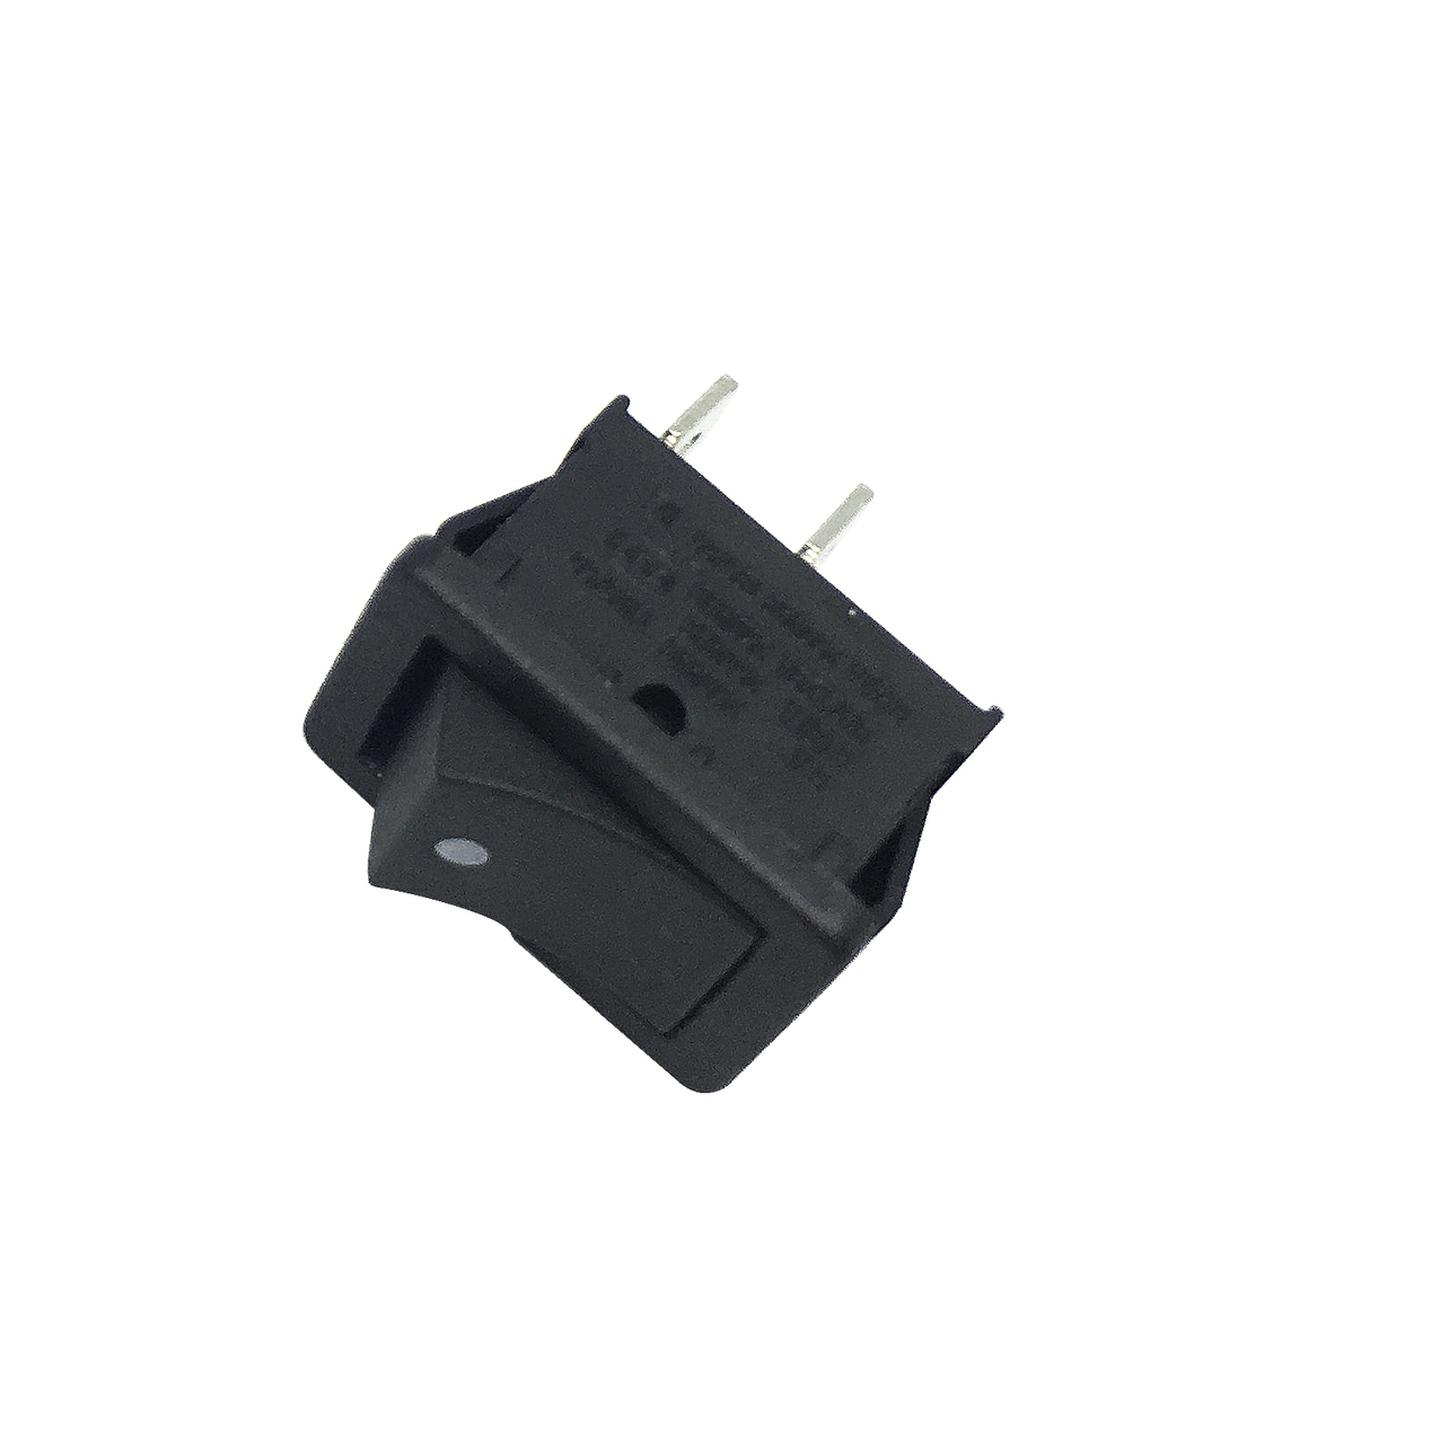 Spare Smart Throttle Switch For MG4508